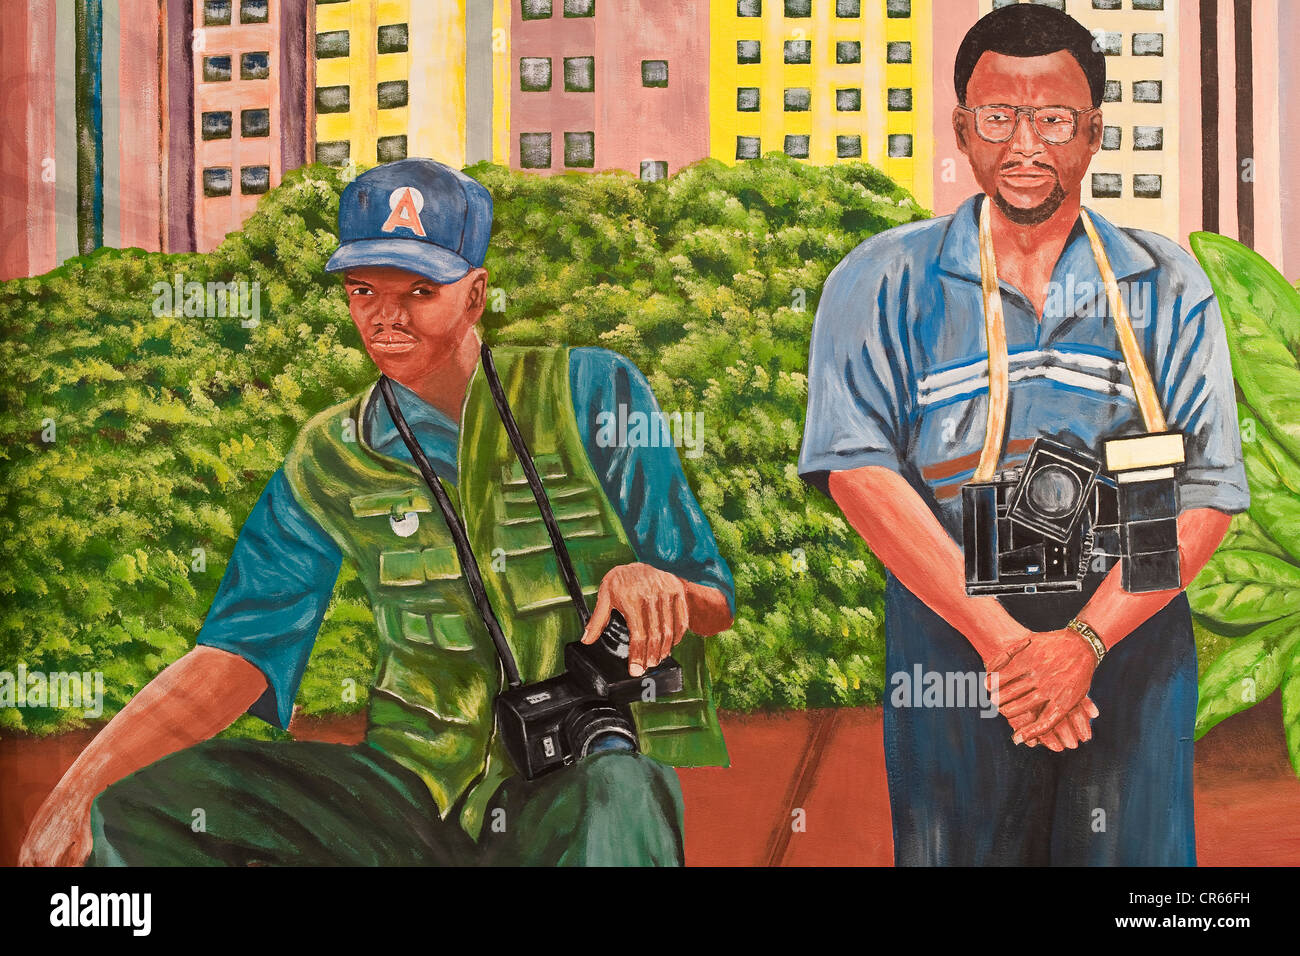 South Africa, Gauteng Province, Johannesburg, Museum Africa, Photographic Museum, painted wall depicting photographers Stock Photo